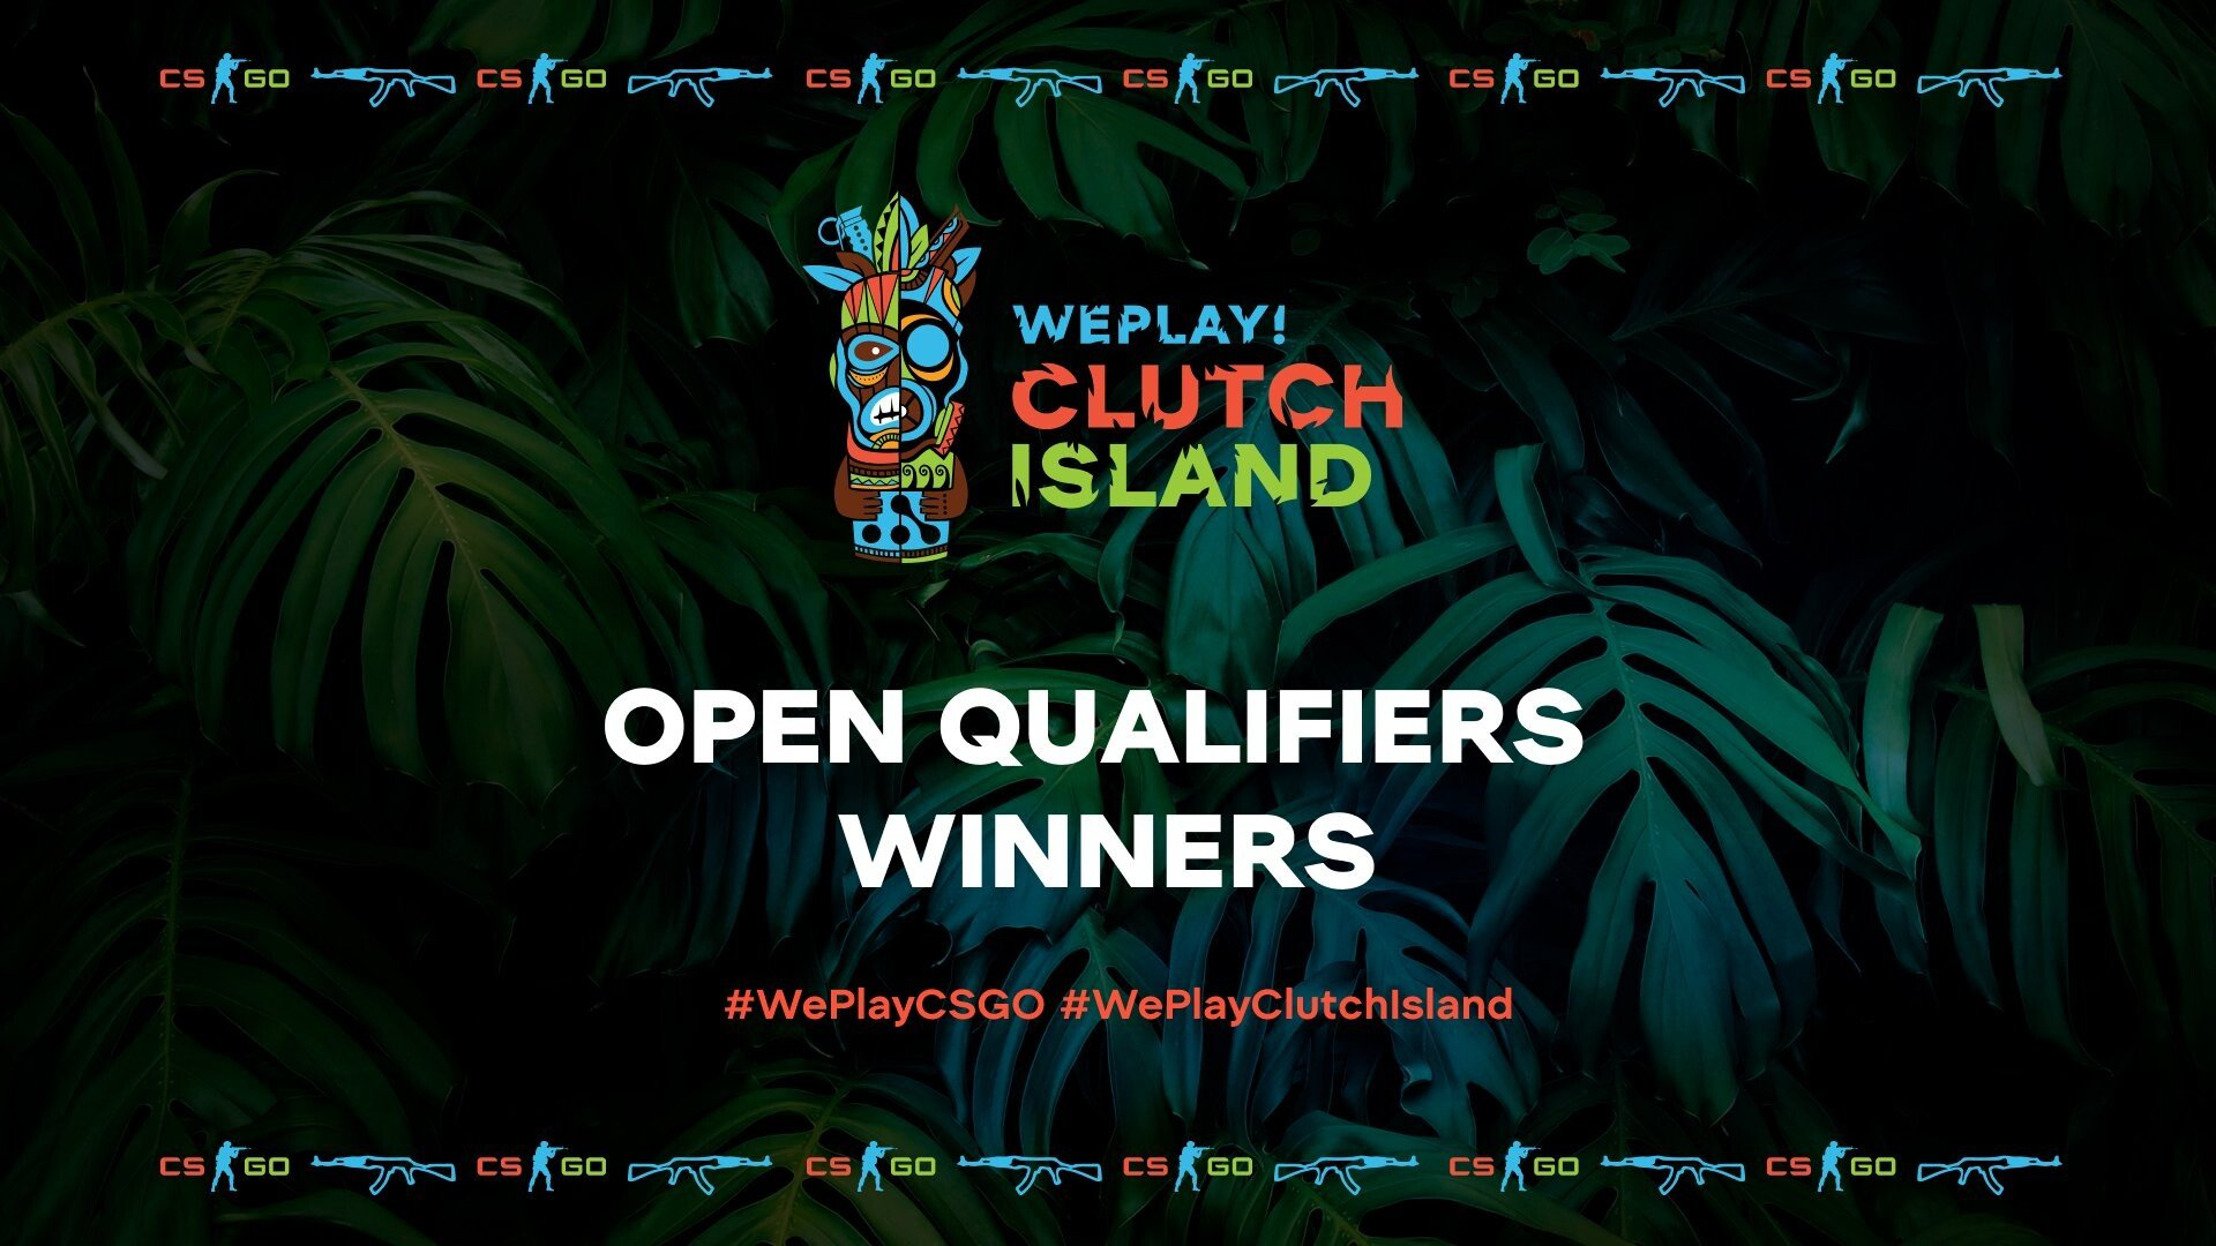 WePlay! Clutch Island Open Qualifiers results